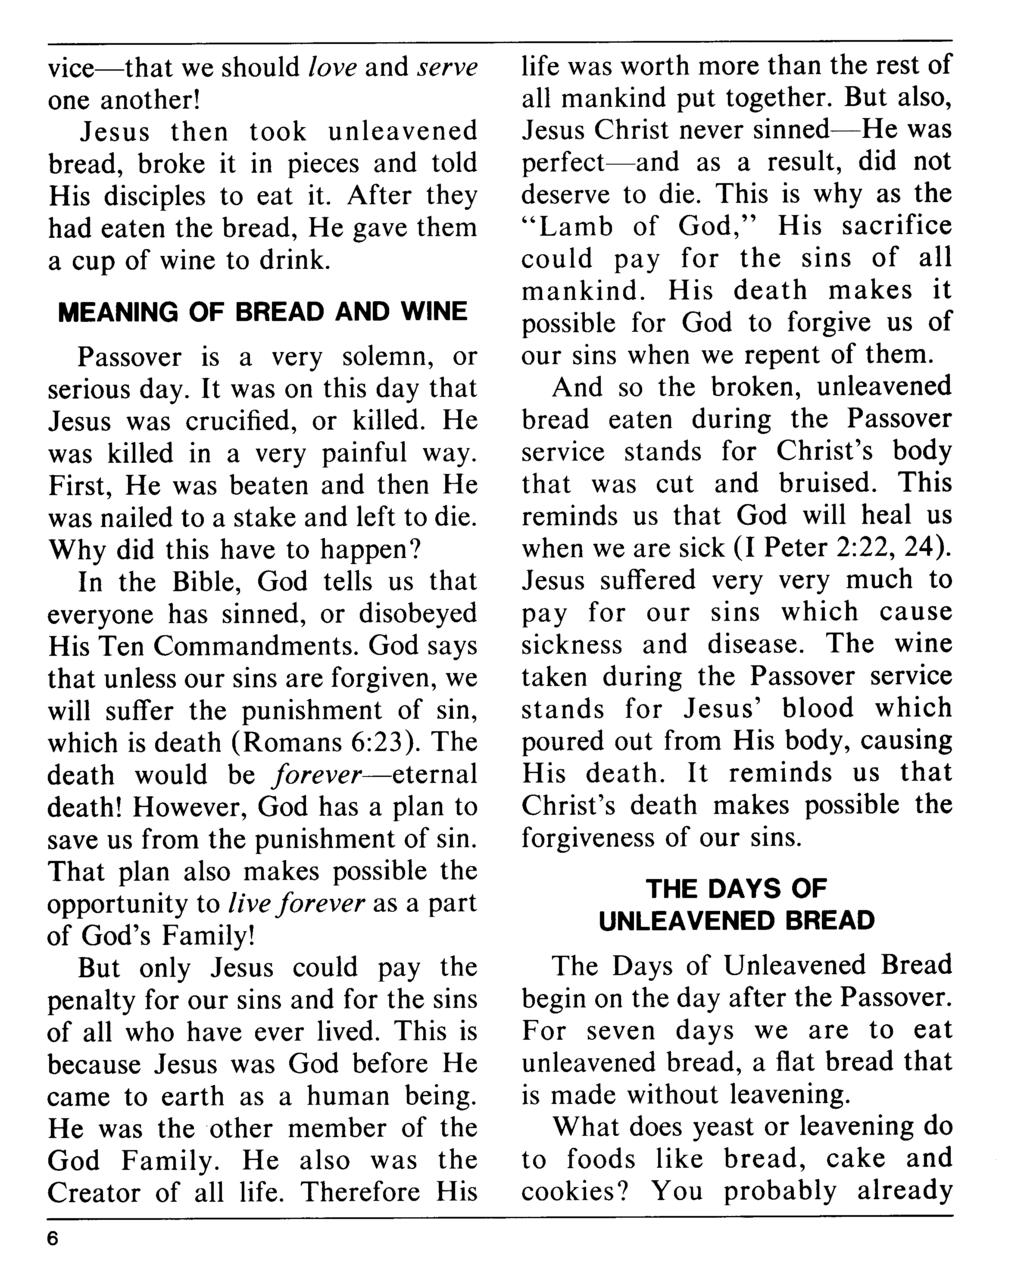 vice-that we should love and serve one another! Jesus then took unleavened bread, broke it in pieces and told His disciples to eat it.